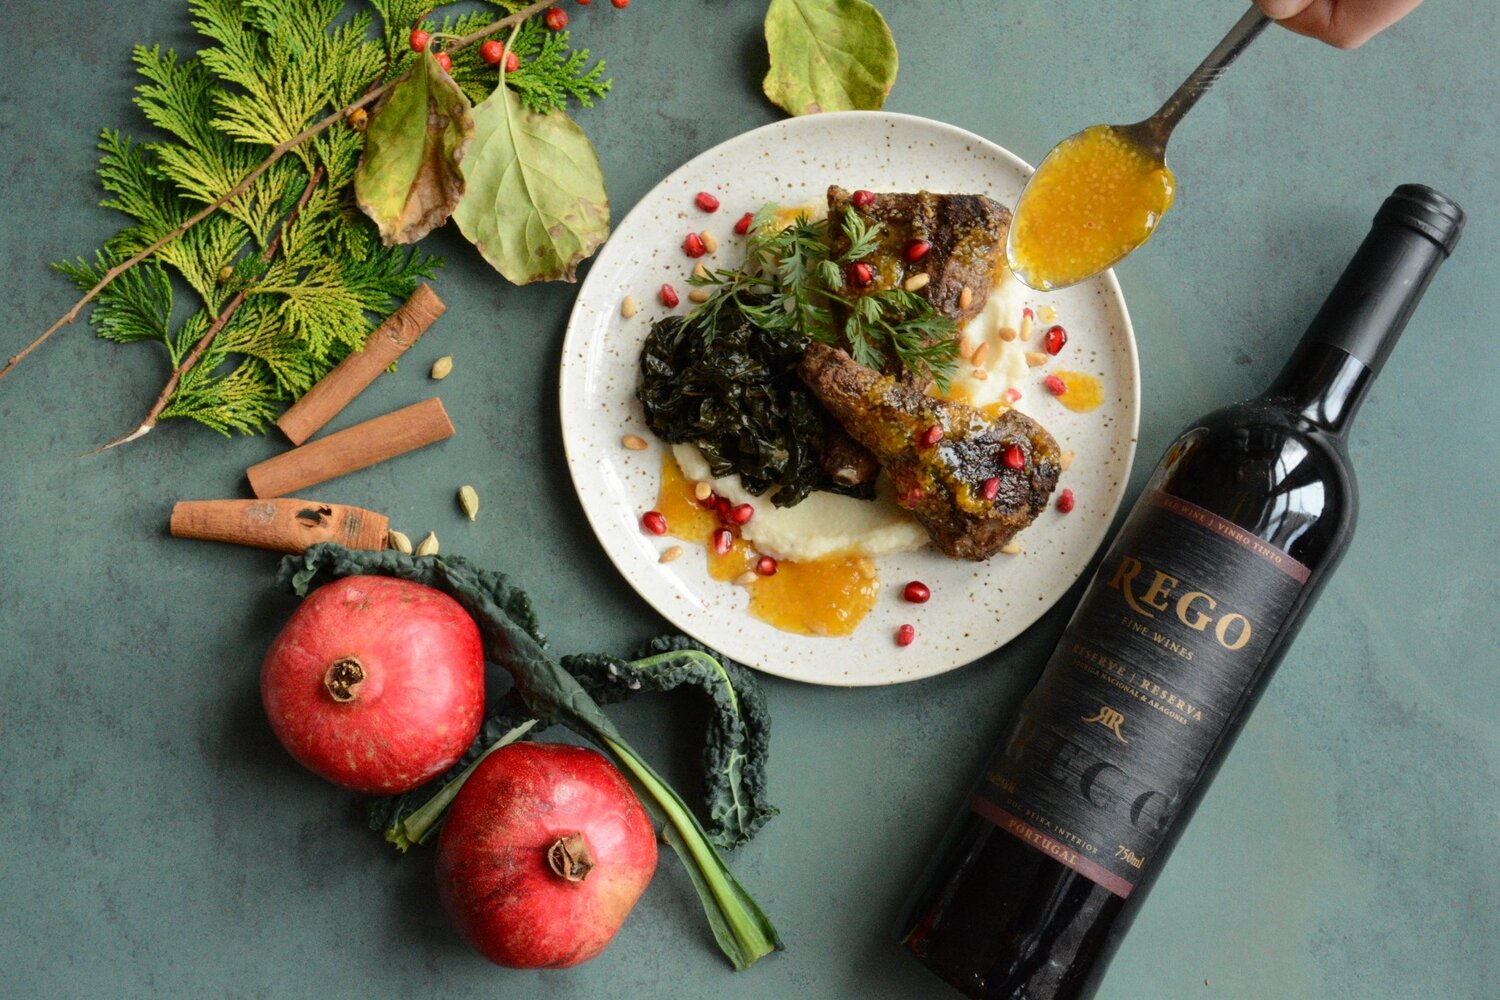 Read below to find a recipe for Garam Masala Spiced Lamb Chops & Husk Cherry Sauce, with healthy sides.